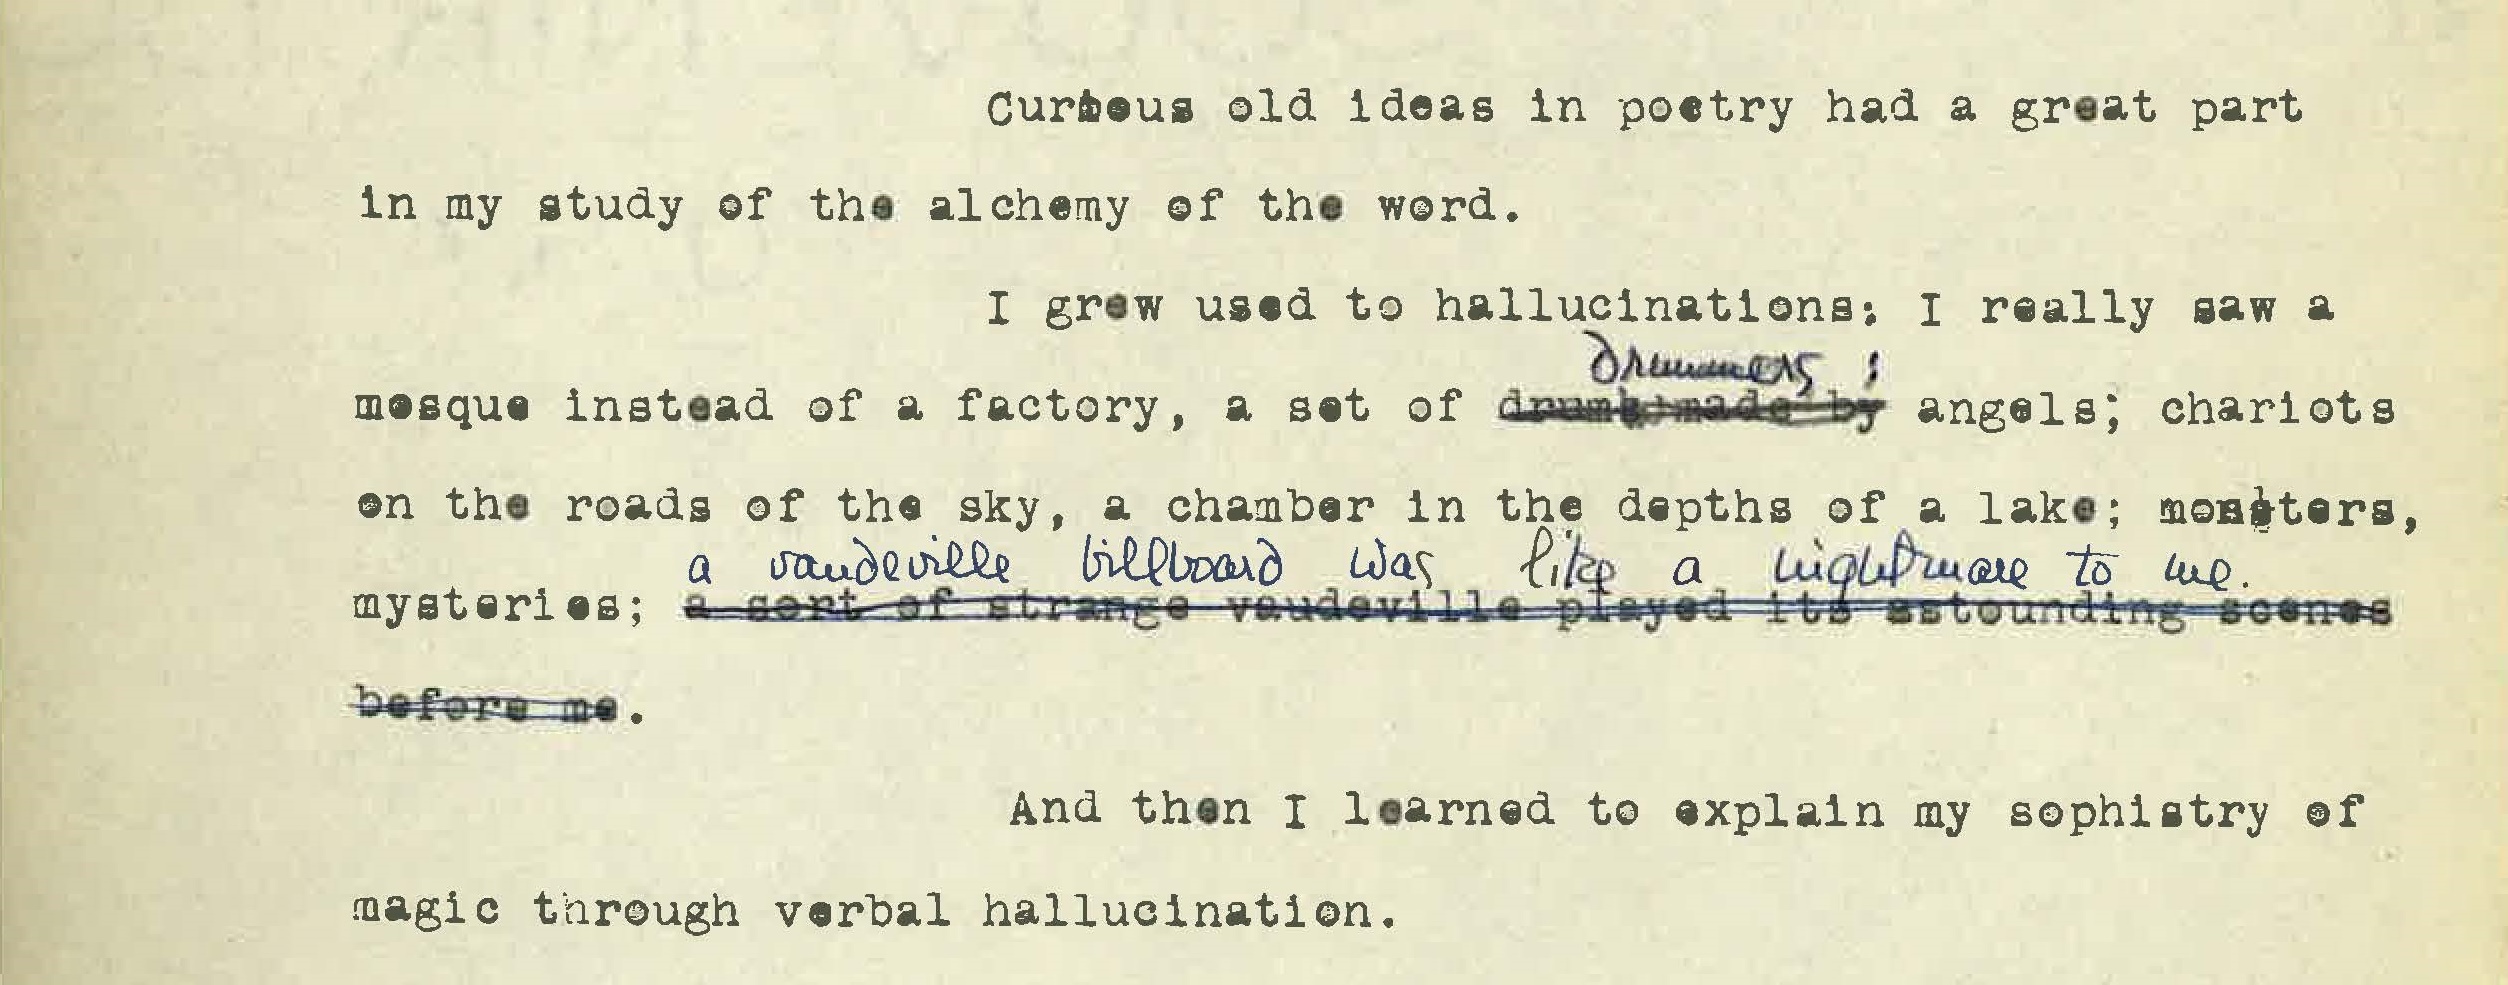 Typewritten text appears on a yellowed page with portions of text crossed out and handwritten over. Among the text, the following appears typed and crossed out: 'a sort of strange vaudeville played its astounding scenes before me' and handwritten above it, 'a vaudeville billboard was like a nightmare to me.'